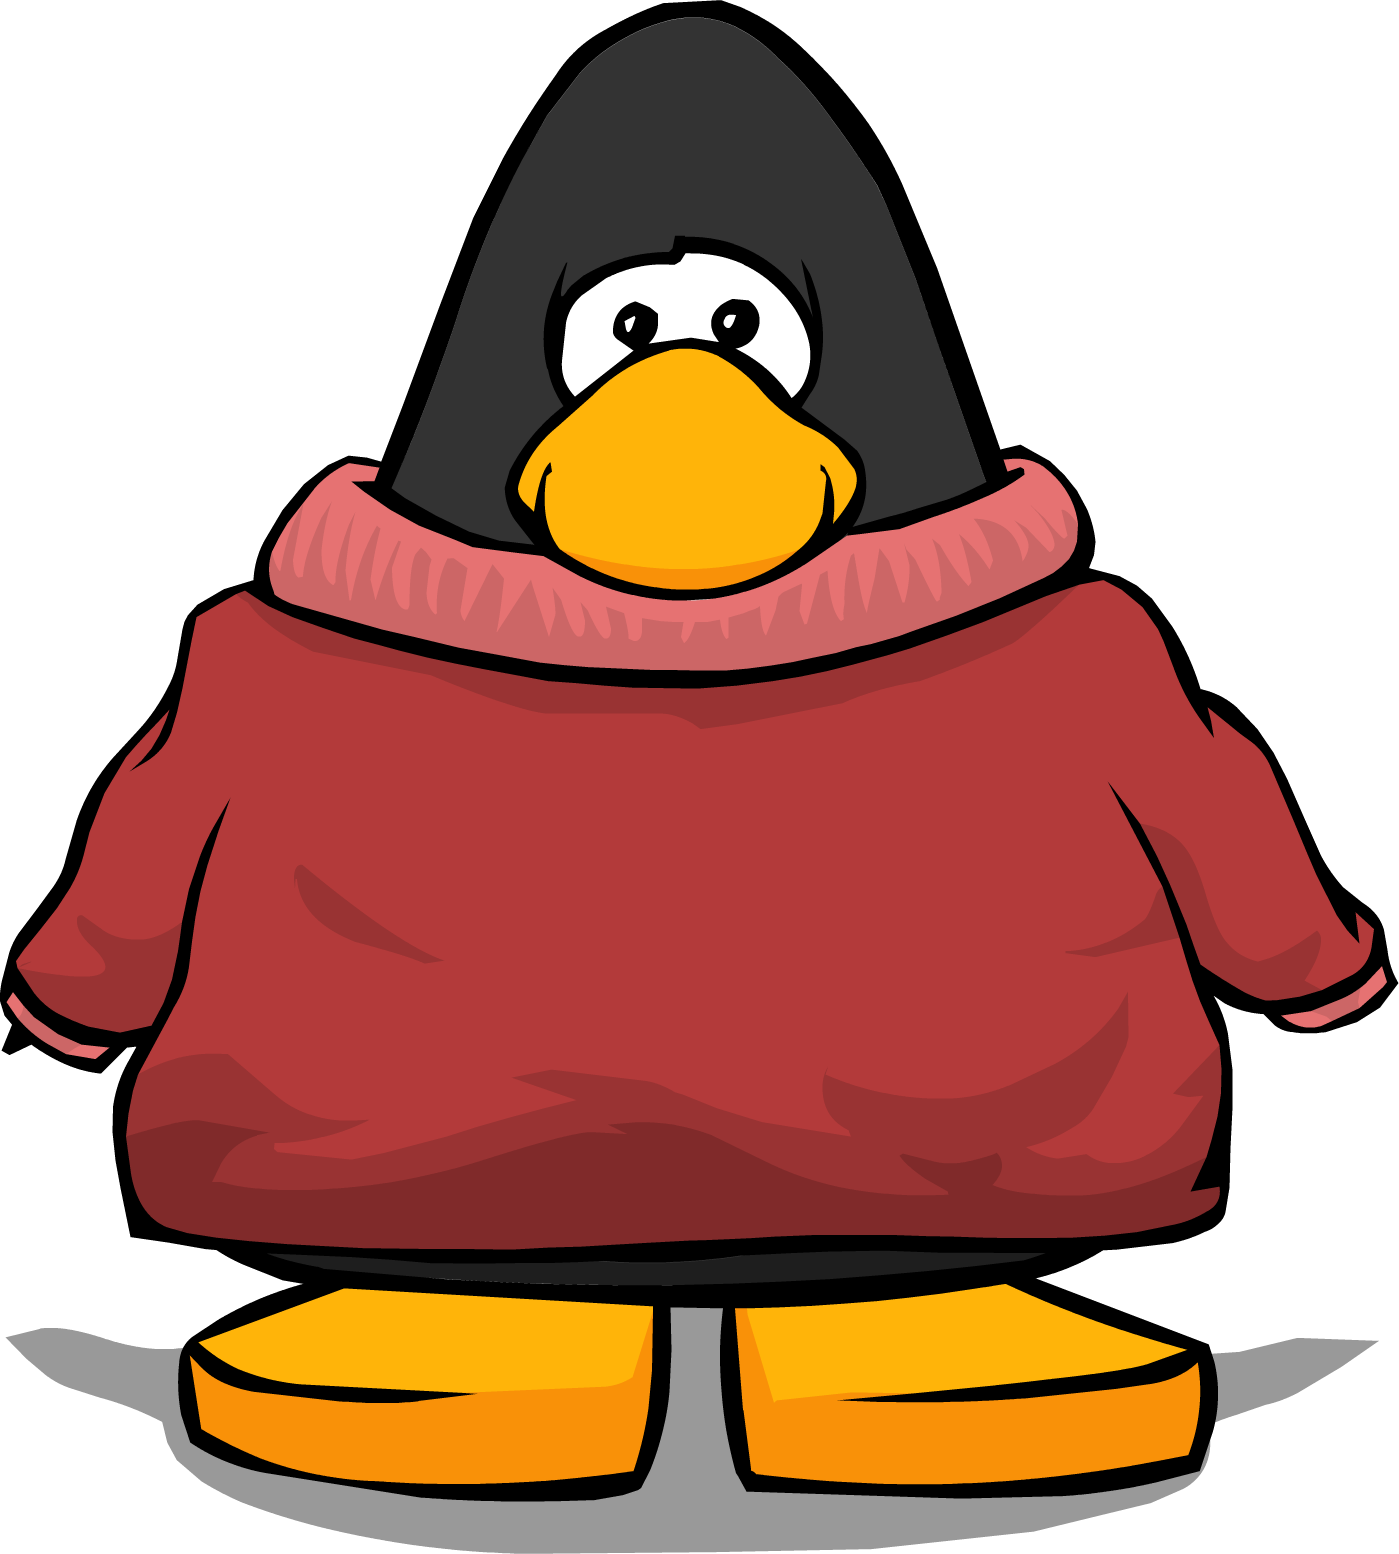 Red Turtleneck From Player Card - Club Penguin Scarf (1399x1554)